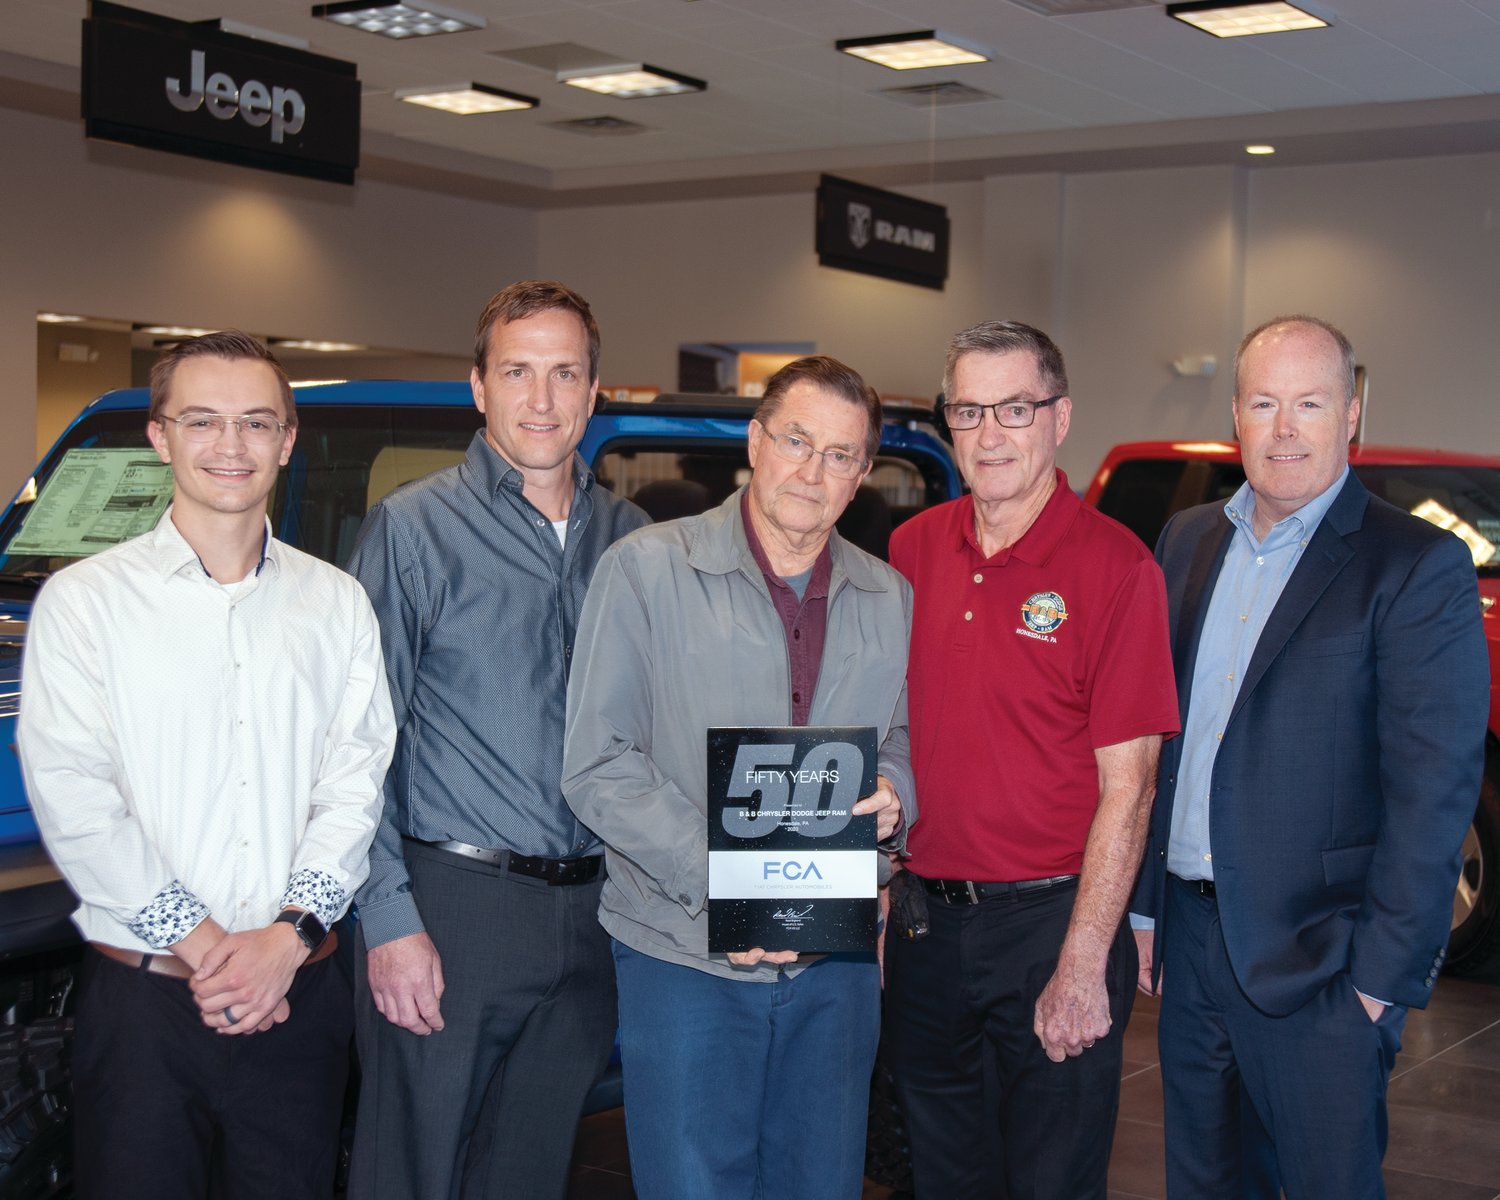 Marking 50 years since three Carmody brothers purchased  he Dodge automobile franchise in Honesdale,.Mason Carmody, left, Stephen Carmody Jr., John Carmody and Stephen Carmody Sr. welcomed John M. Mack, director of Chrysler Group’s mid-Atlantic business center to the dealership.